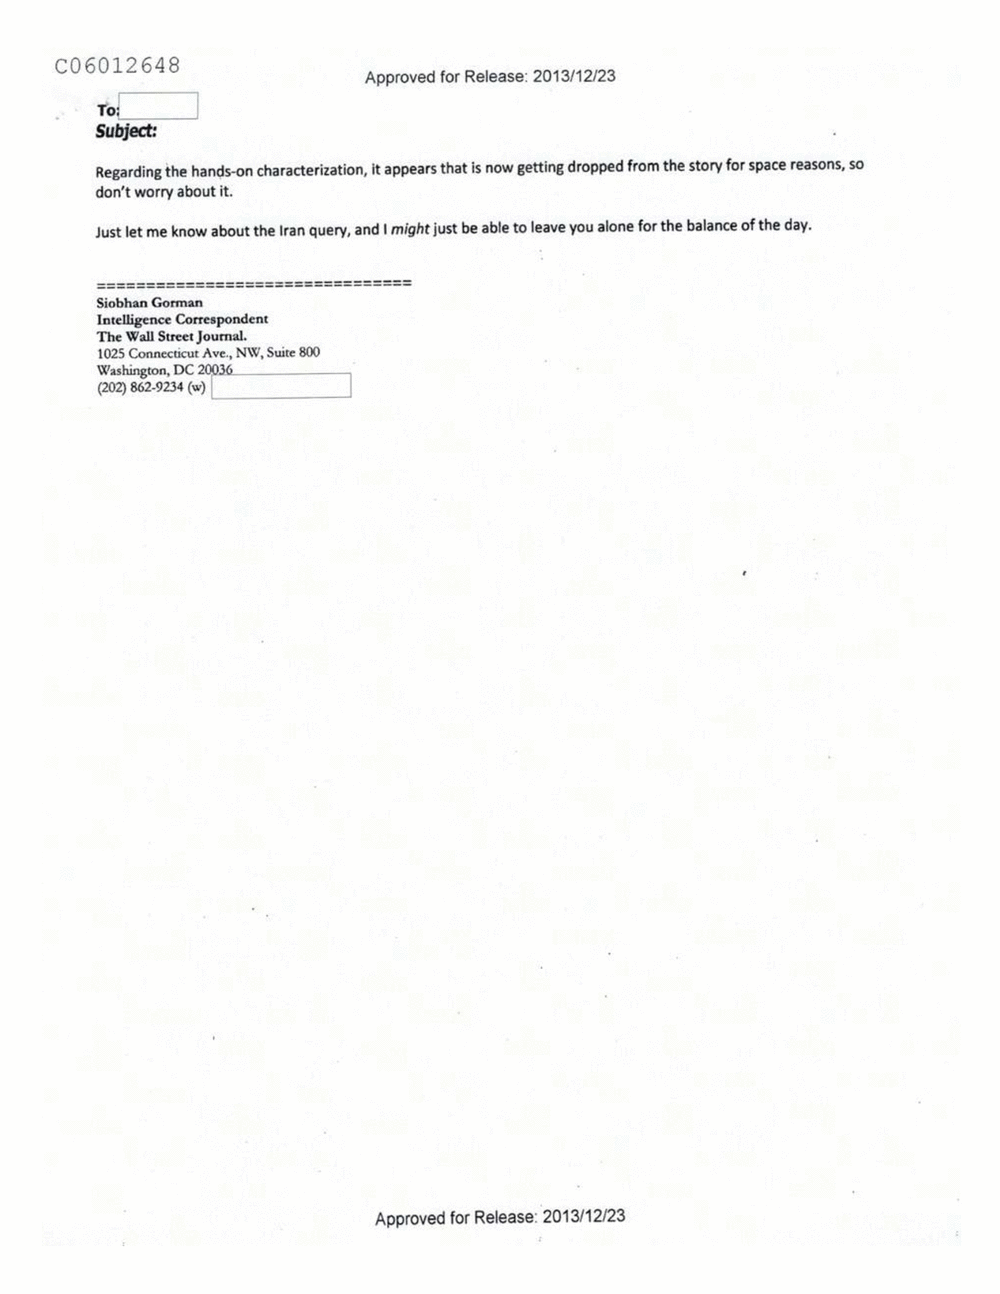 Page 220 from Email Correspondence Between Reporters and CIA Flacks